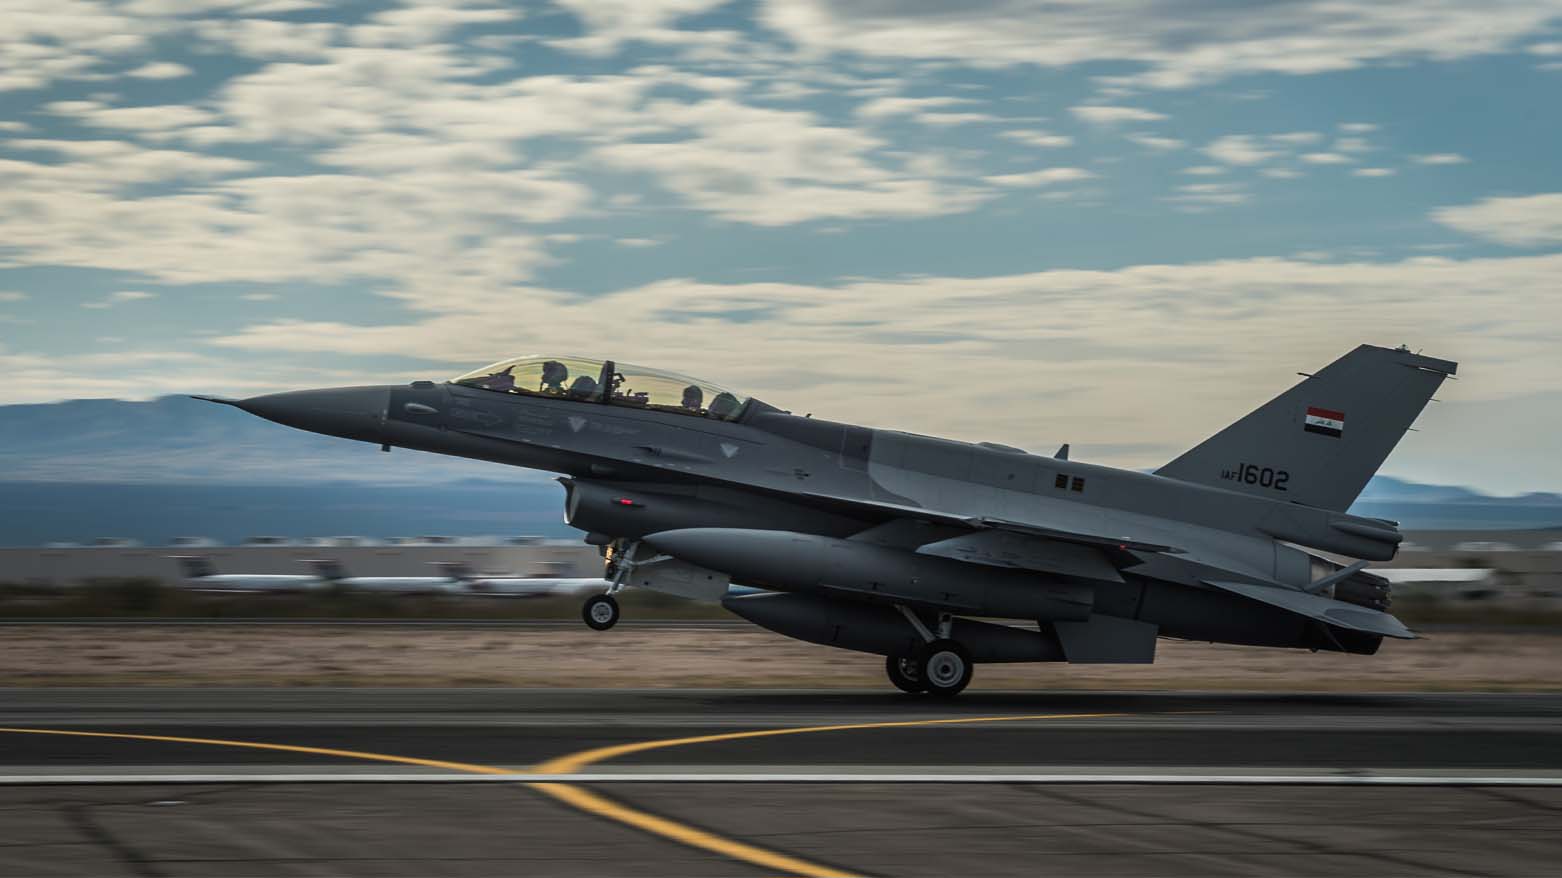 An Iraqi F-16 is pictured during a takeoff at a US airbase during a training exercise. (Photo: U.S. Air Force photo/Senior Airman Jordan Castelan)